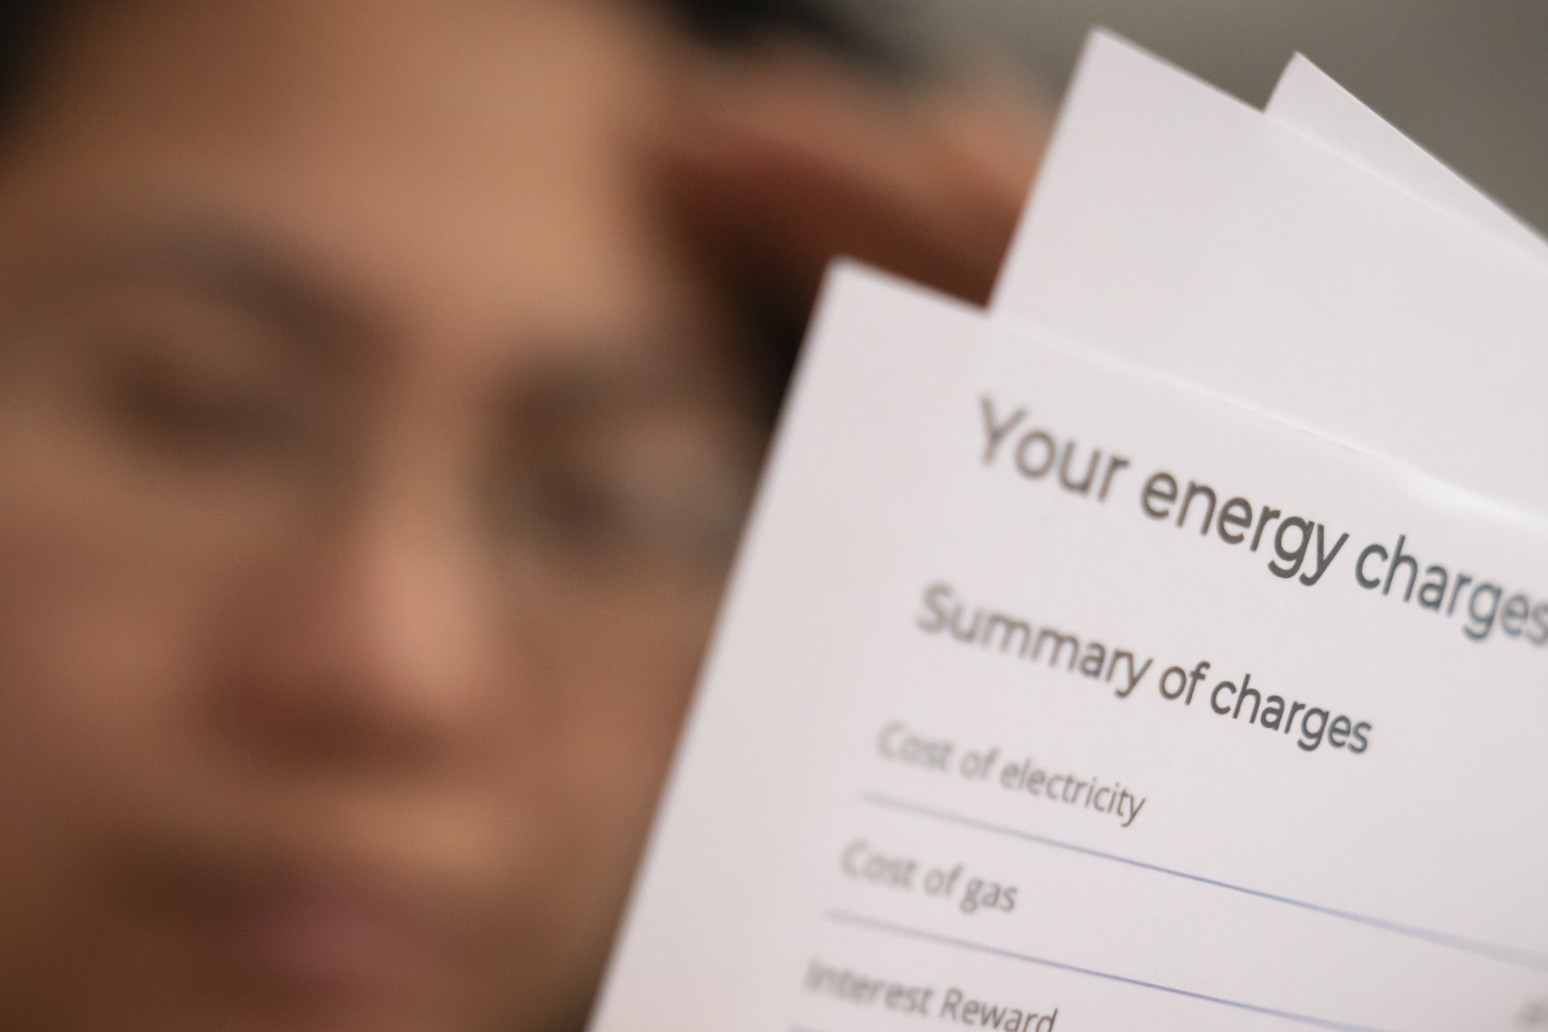 Ofgem tells 17 suppliers to improve their approach to vulnerable customers 